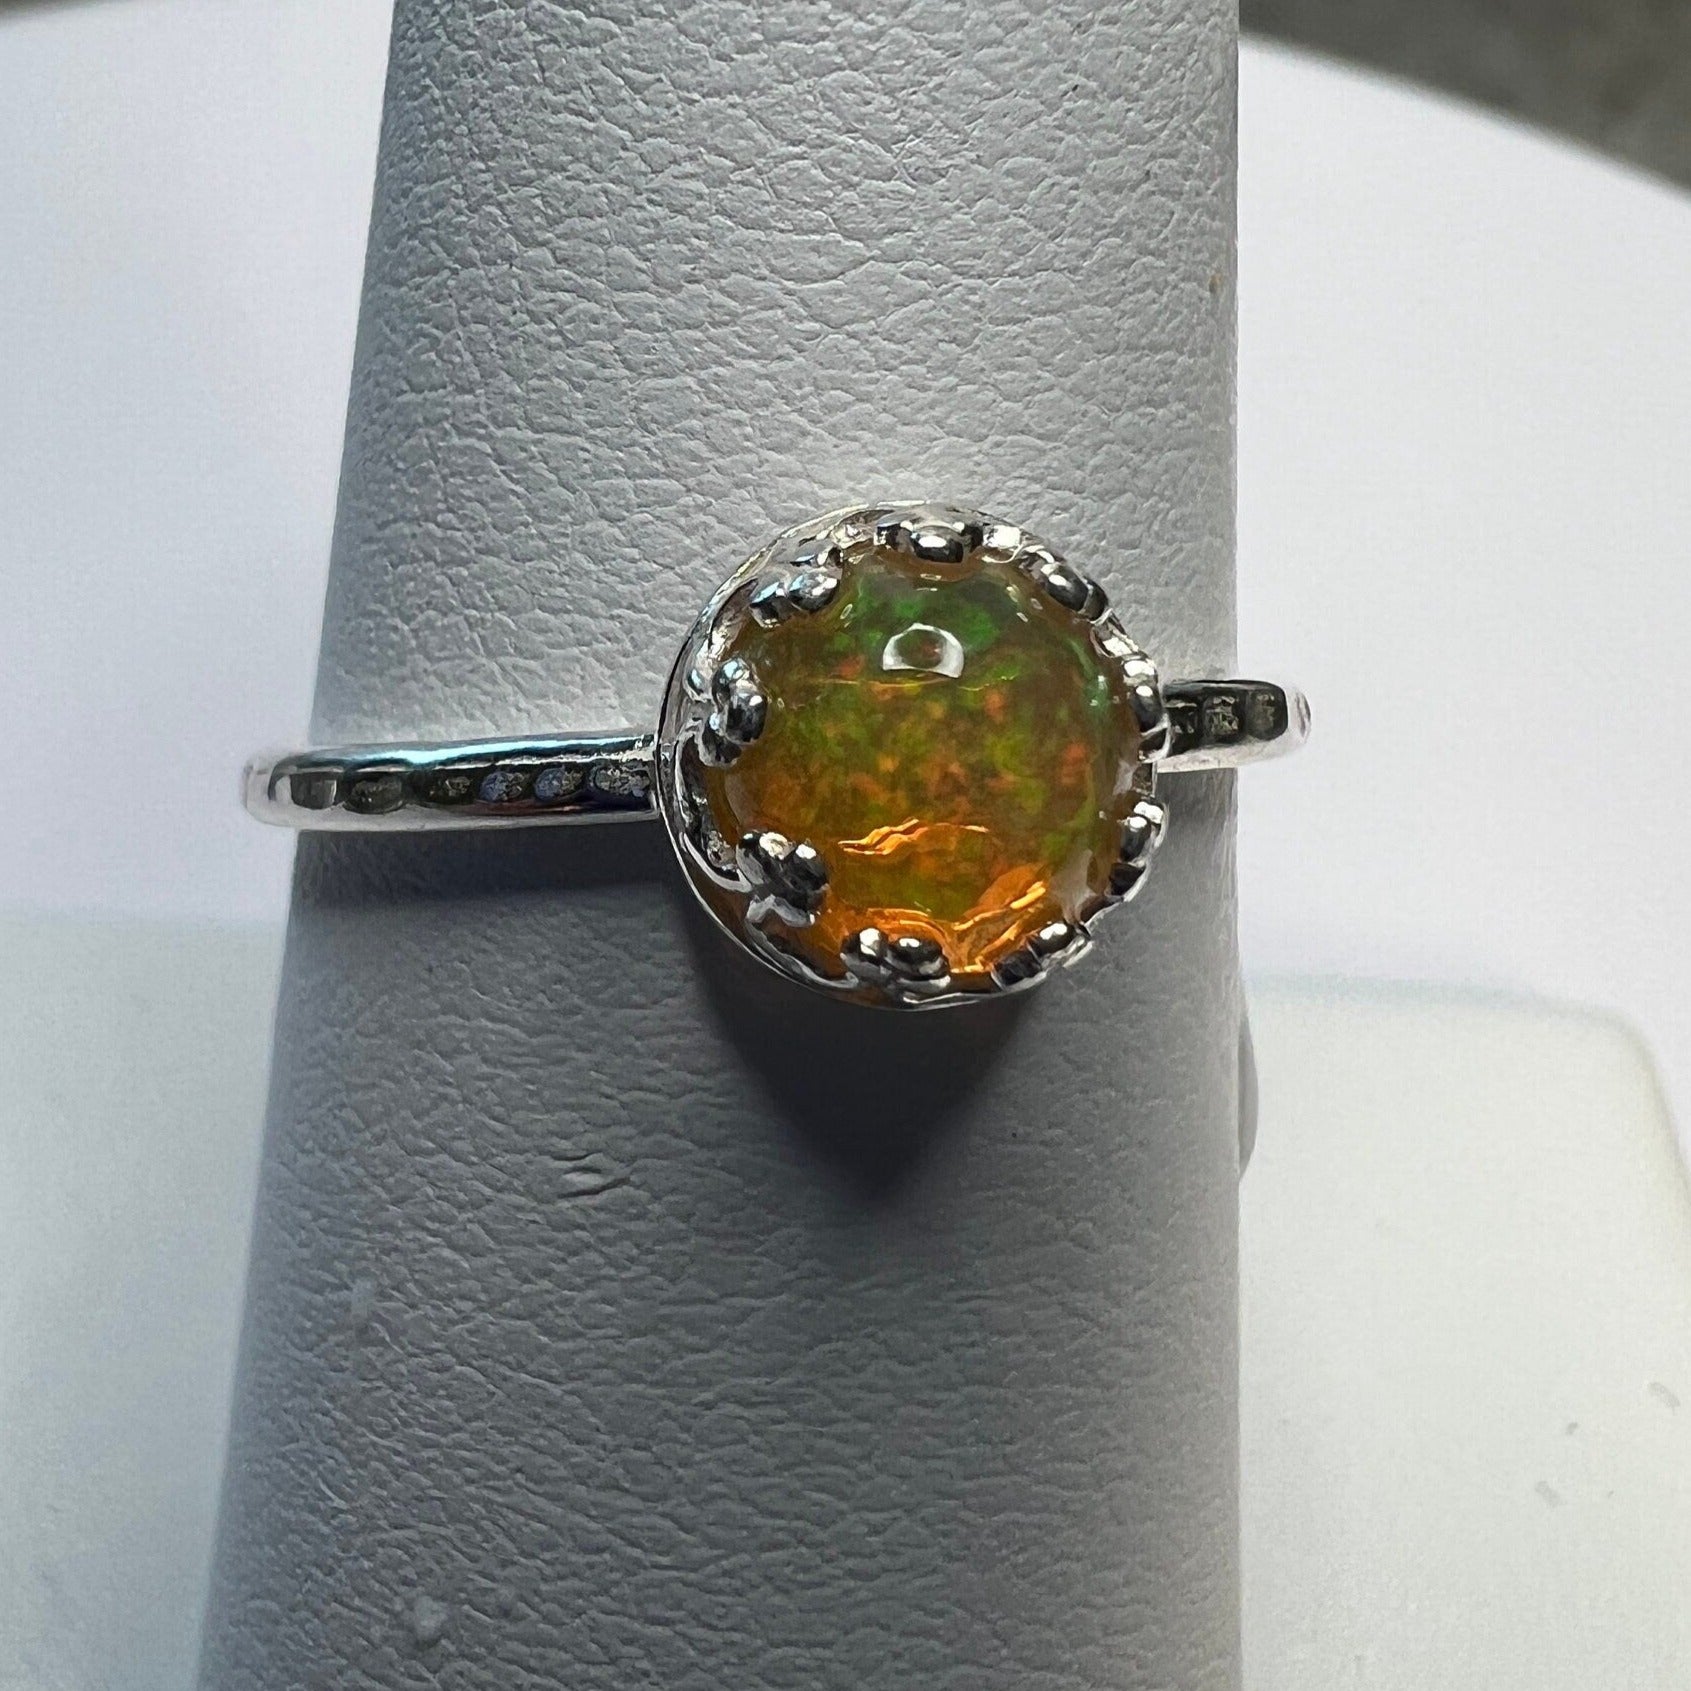 Unique AAA Quality Ethiopian Opal Ring in Sterling Silver - Great Play of Color!